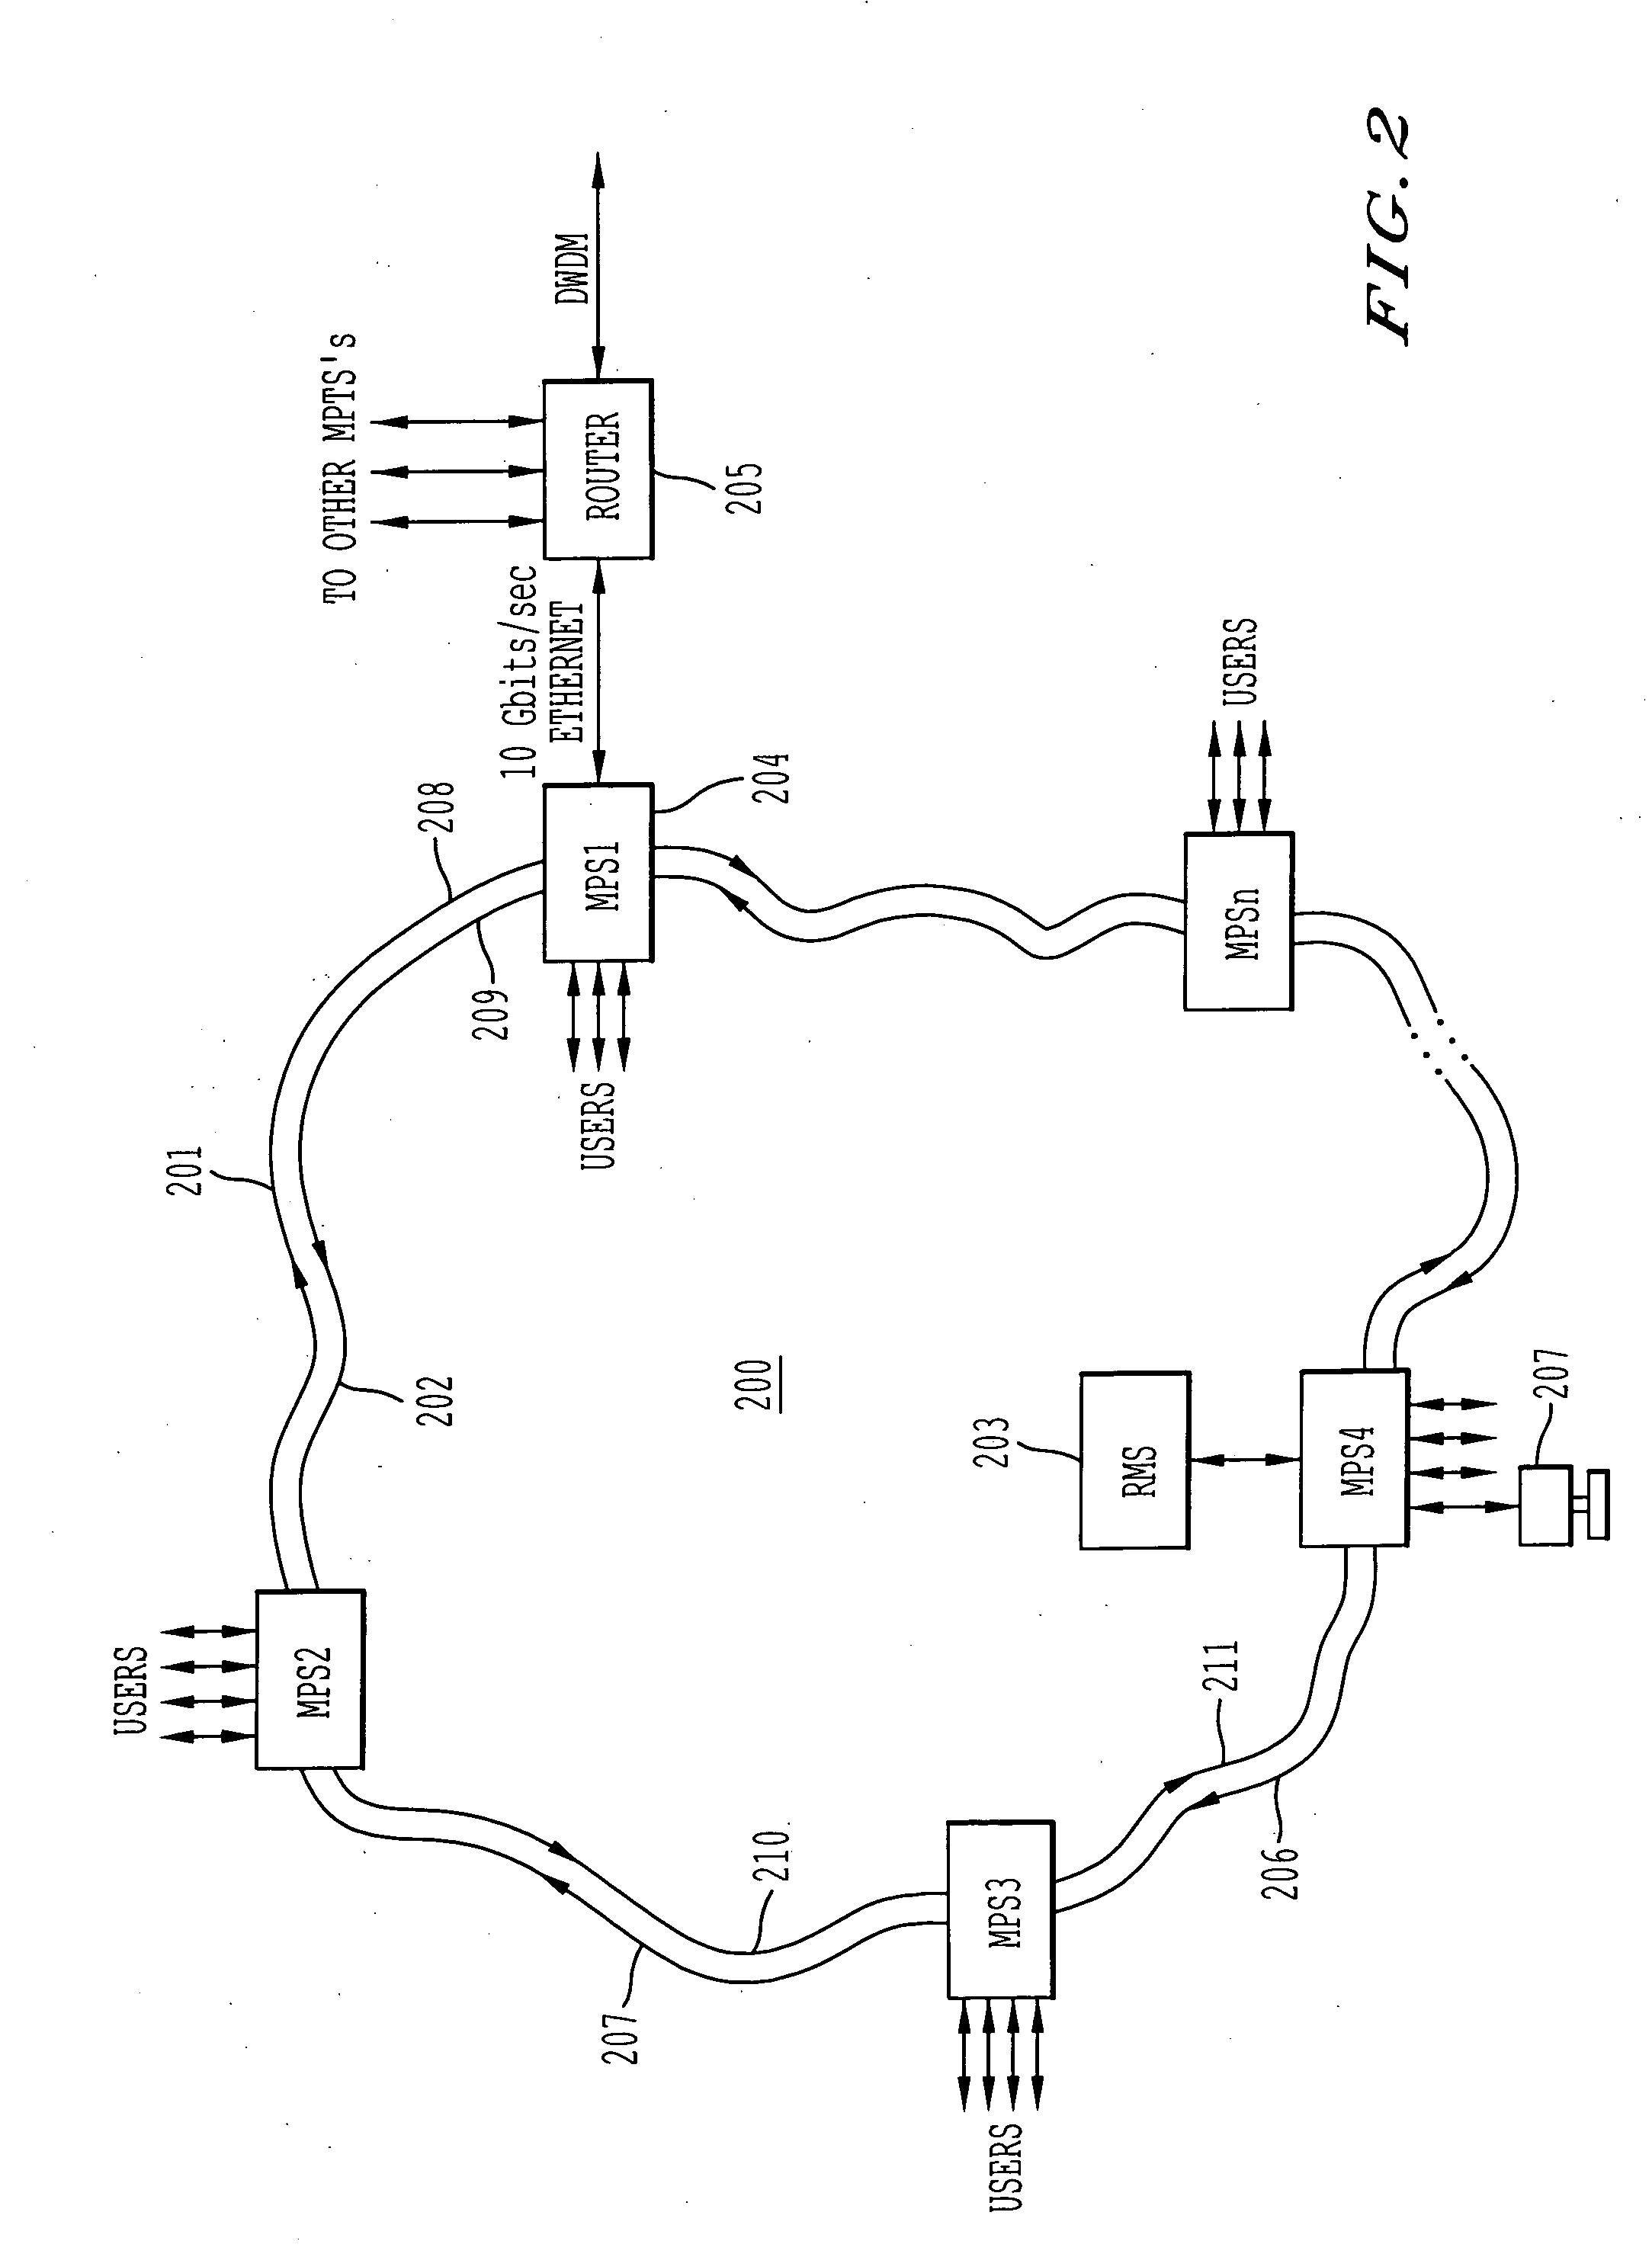 Per-flow rate control for an asynchronous metro packet transport ring